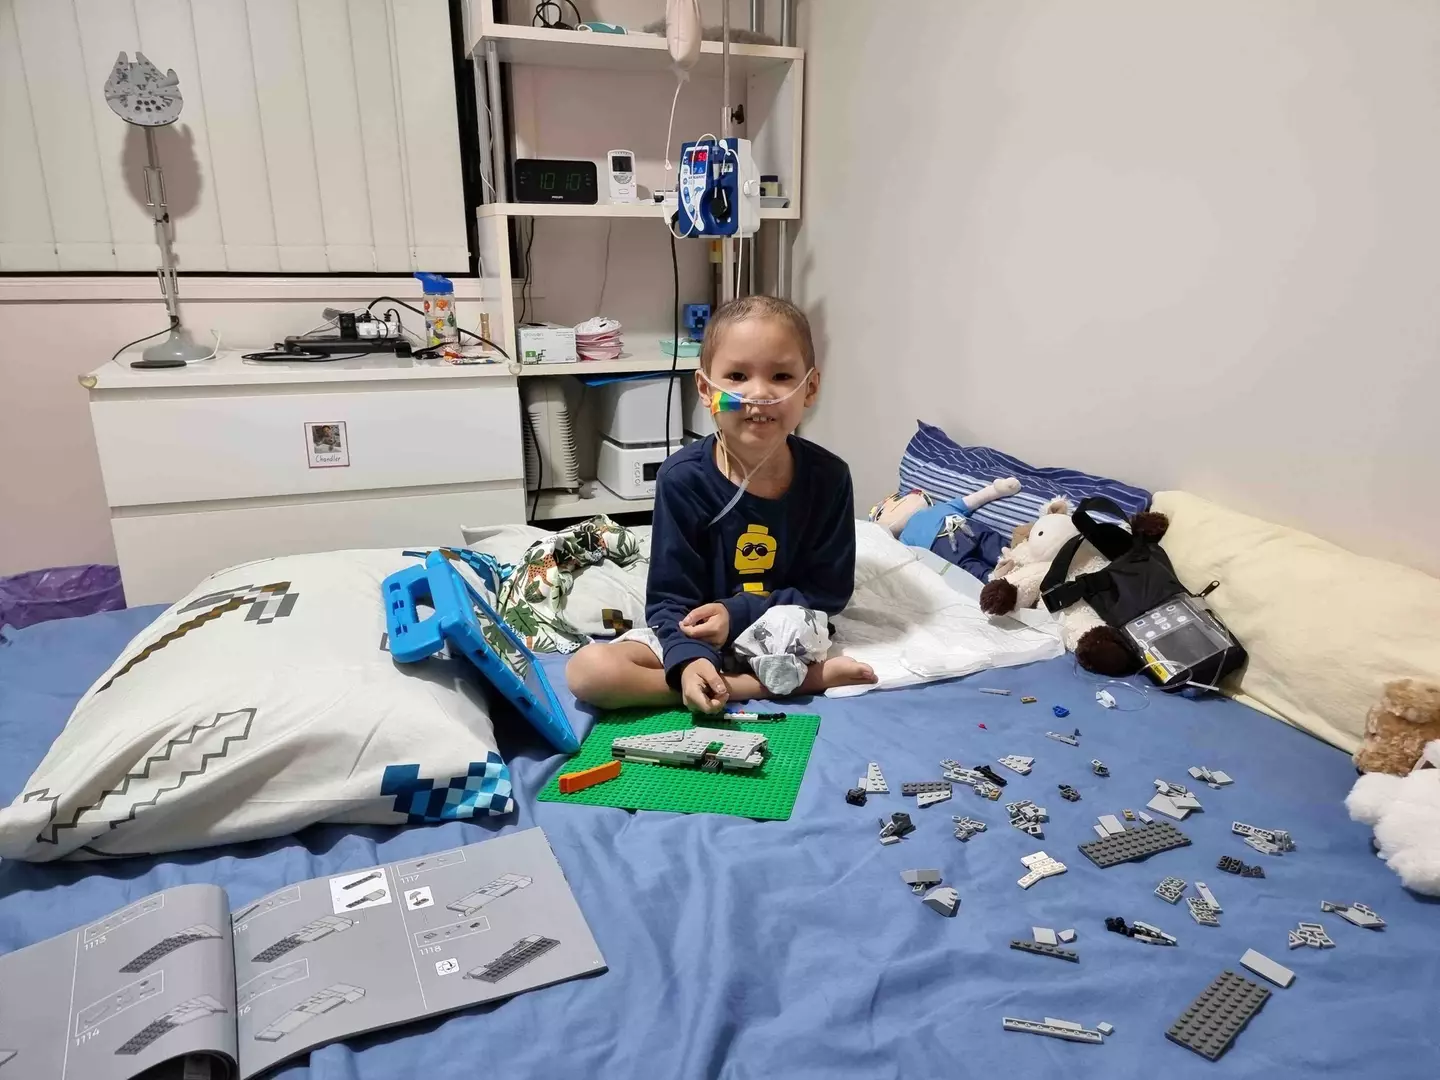 Young Chandler built more than 30 LEGO sets during his months of treatment.